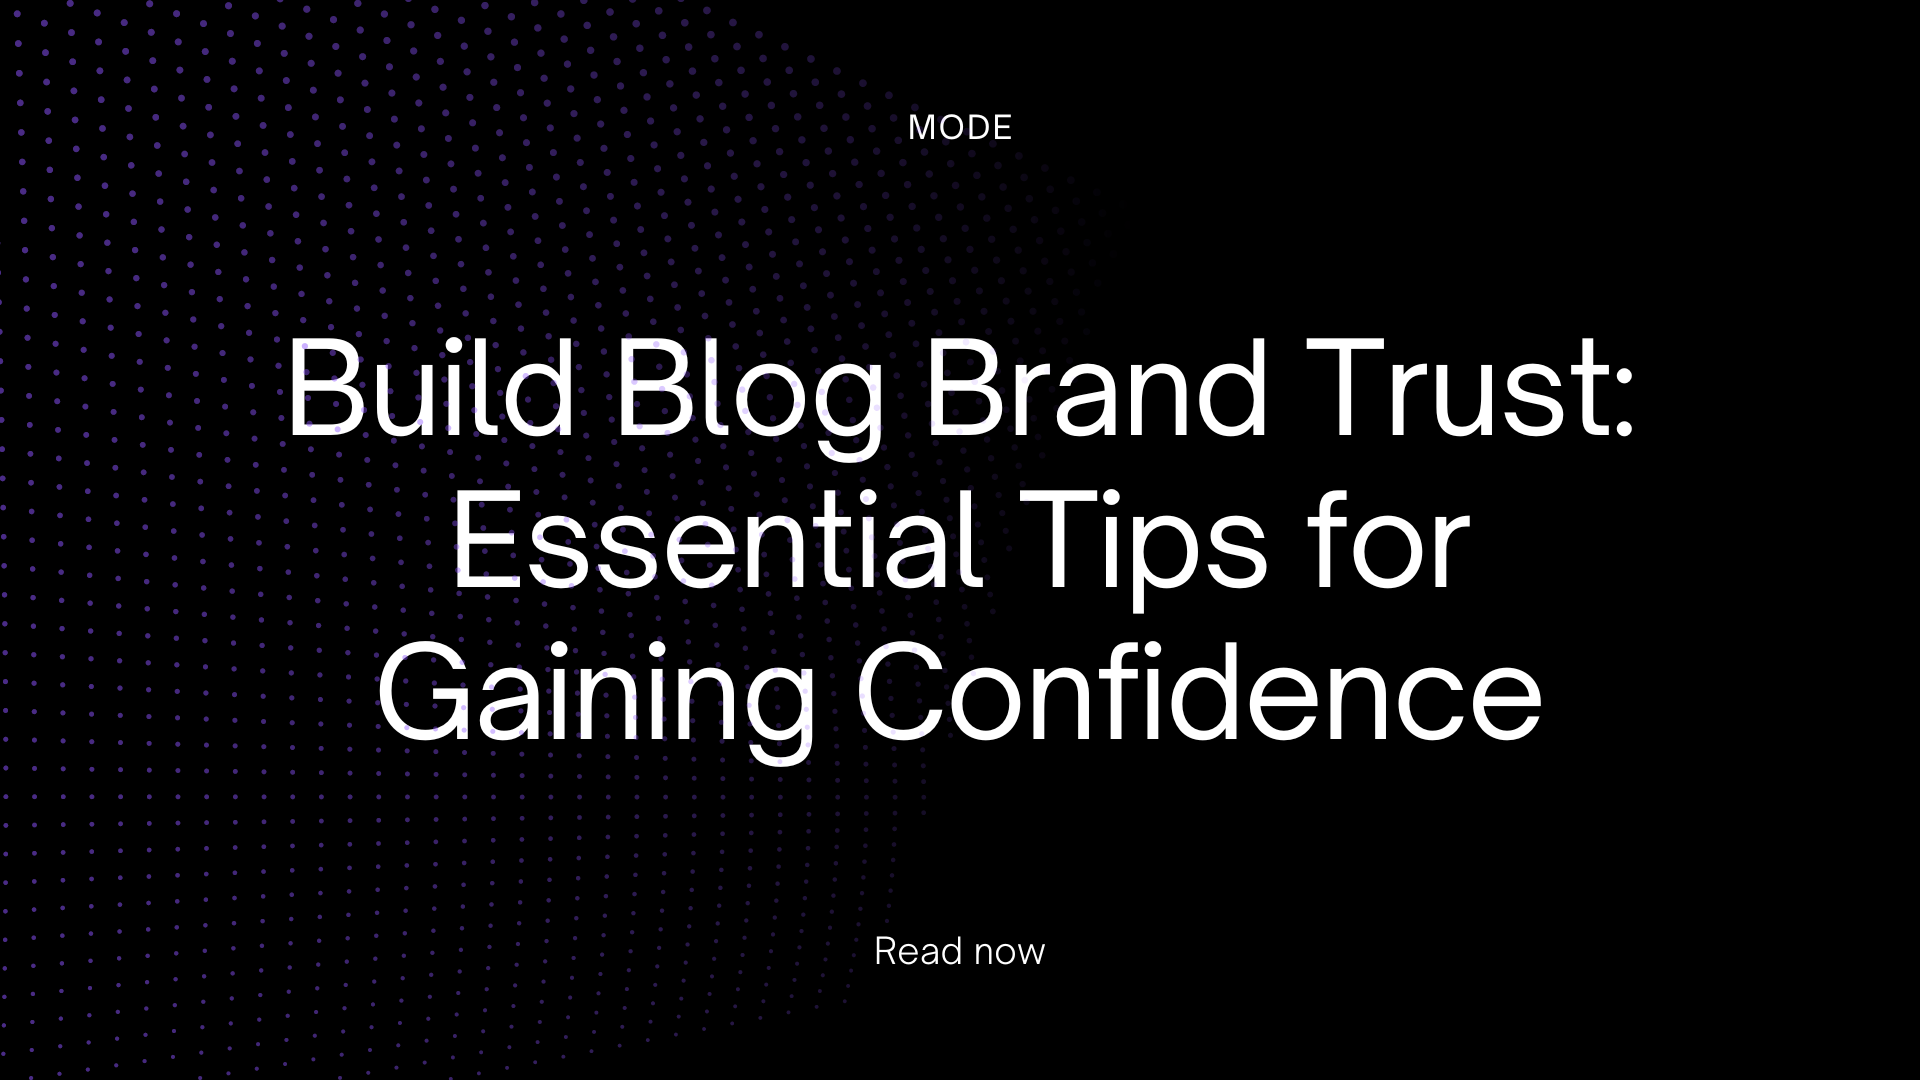 Build Blog Brand Trust: Essential Tips for Gaining Confidence